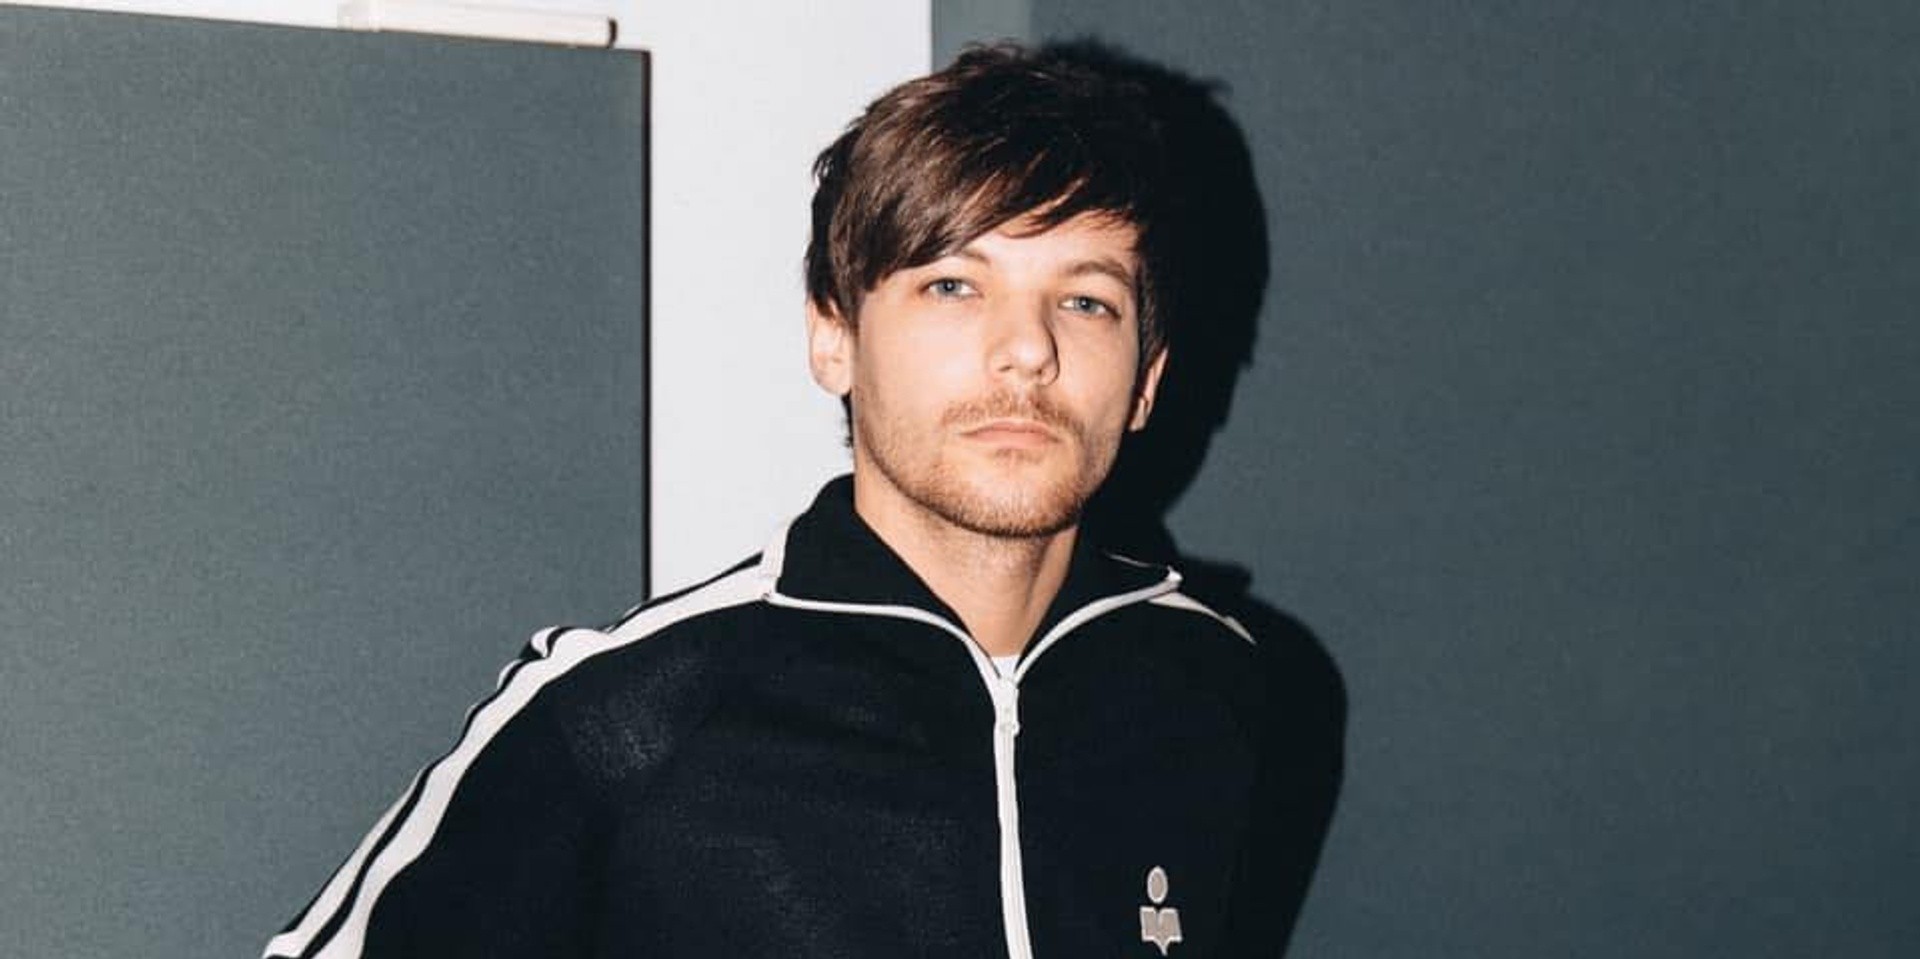 Louis Tomlinson is back with solo debut album, Walls - listen 